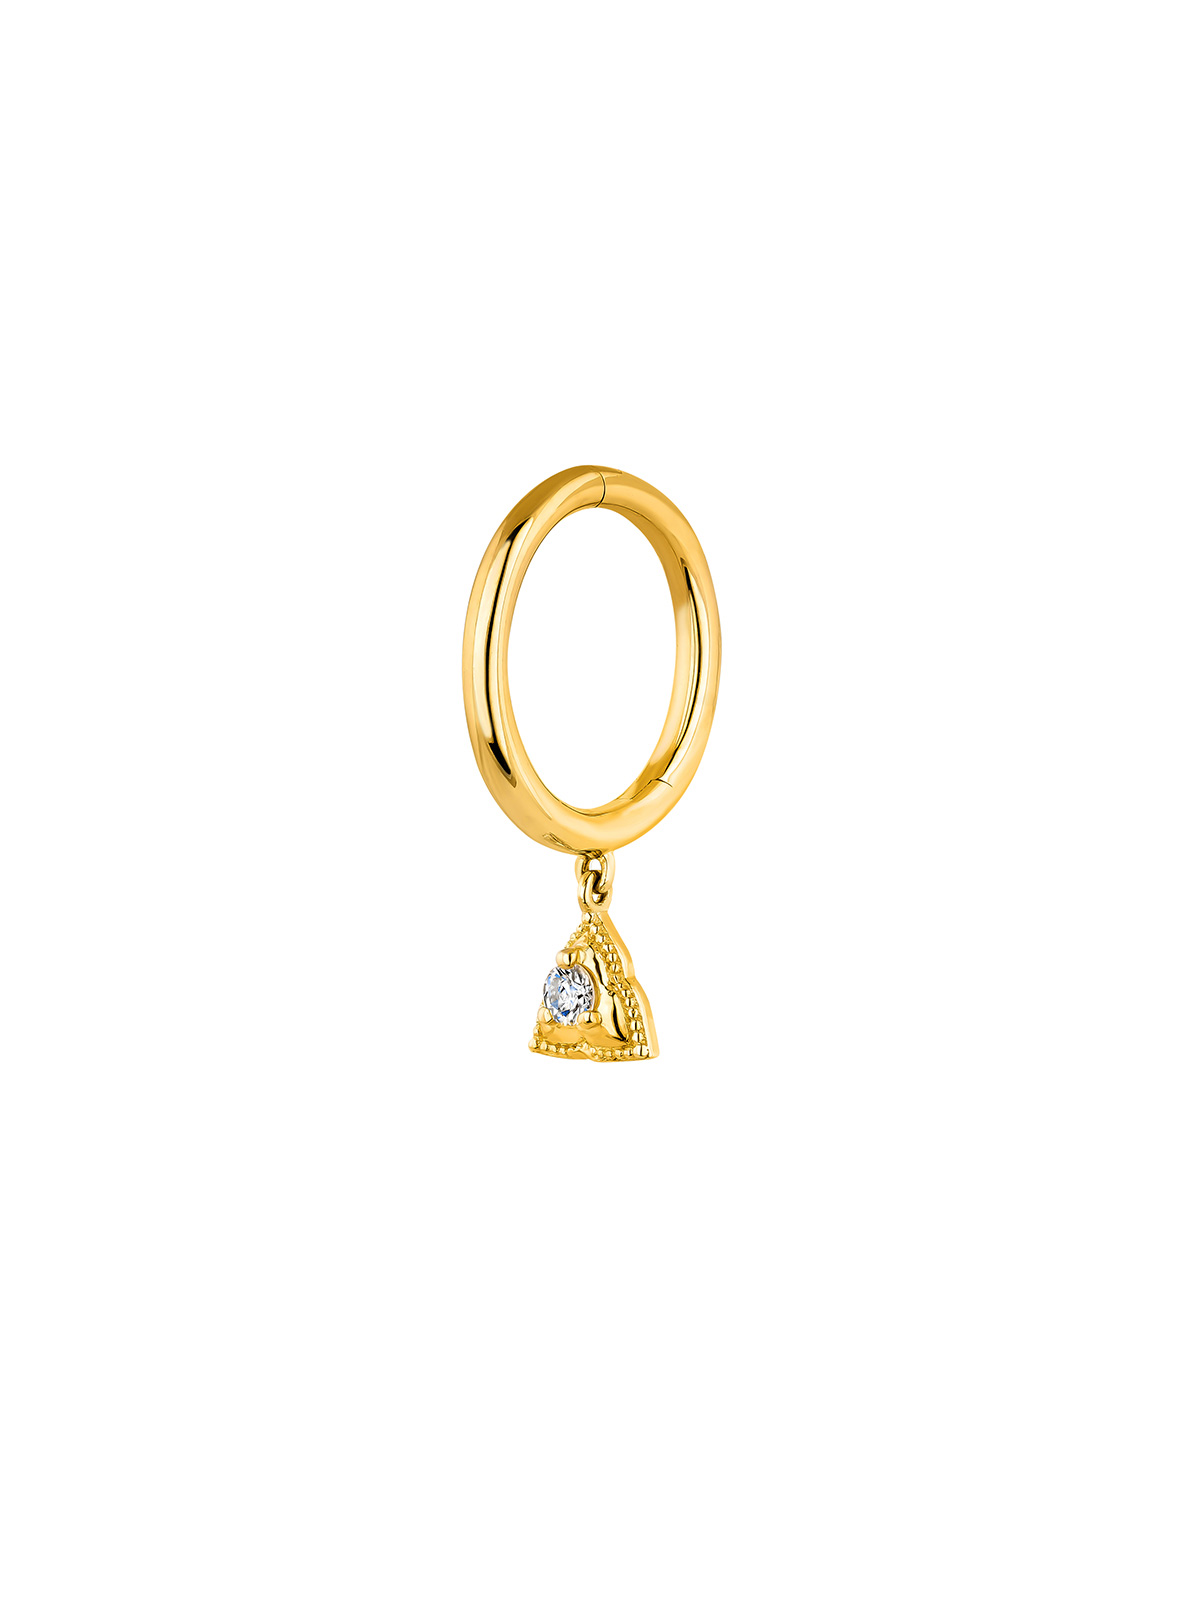 Individual 9K yellow gold hoop earring with triangle and white topaz.